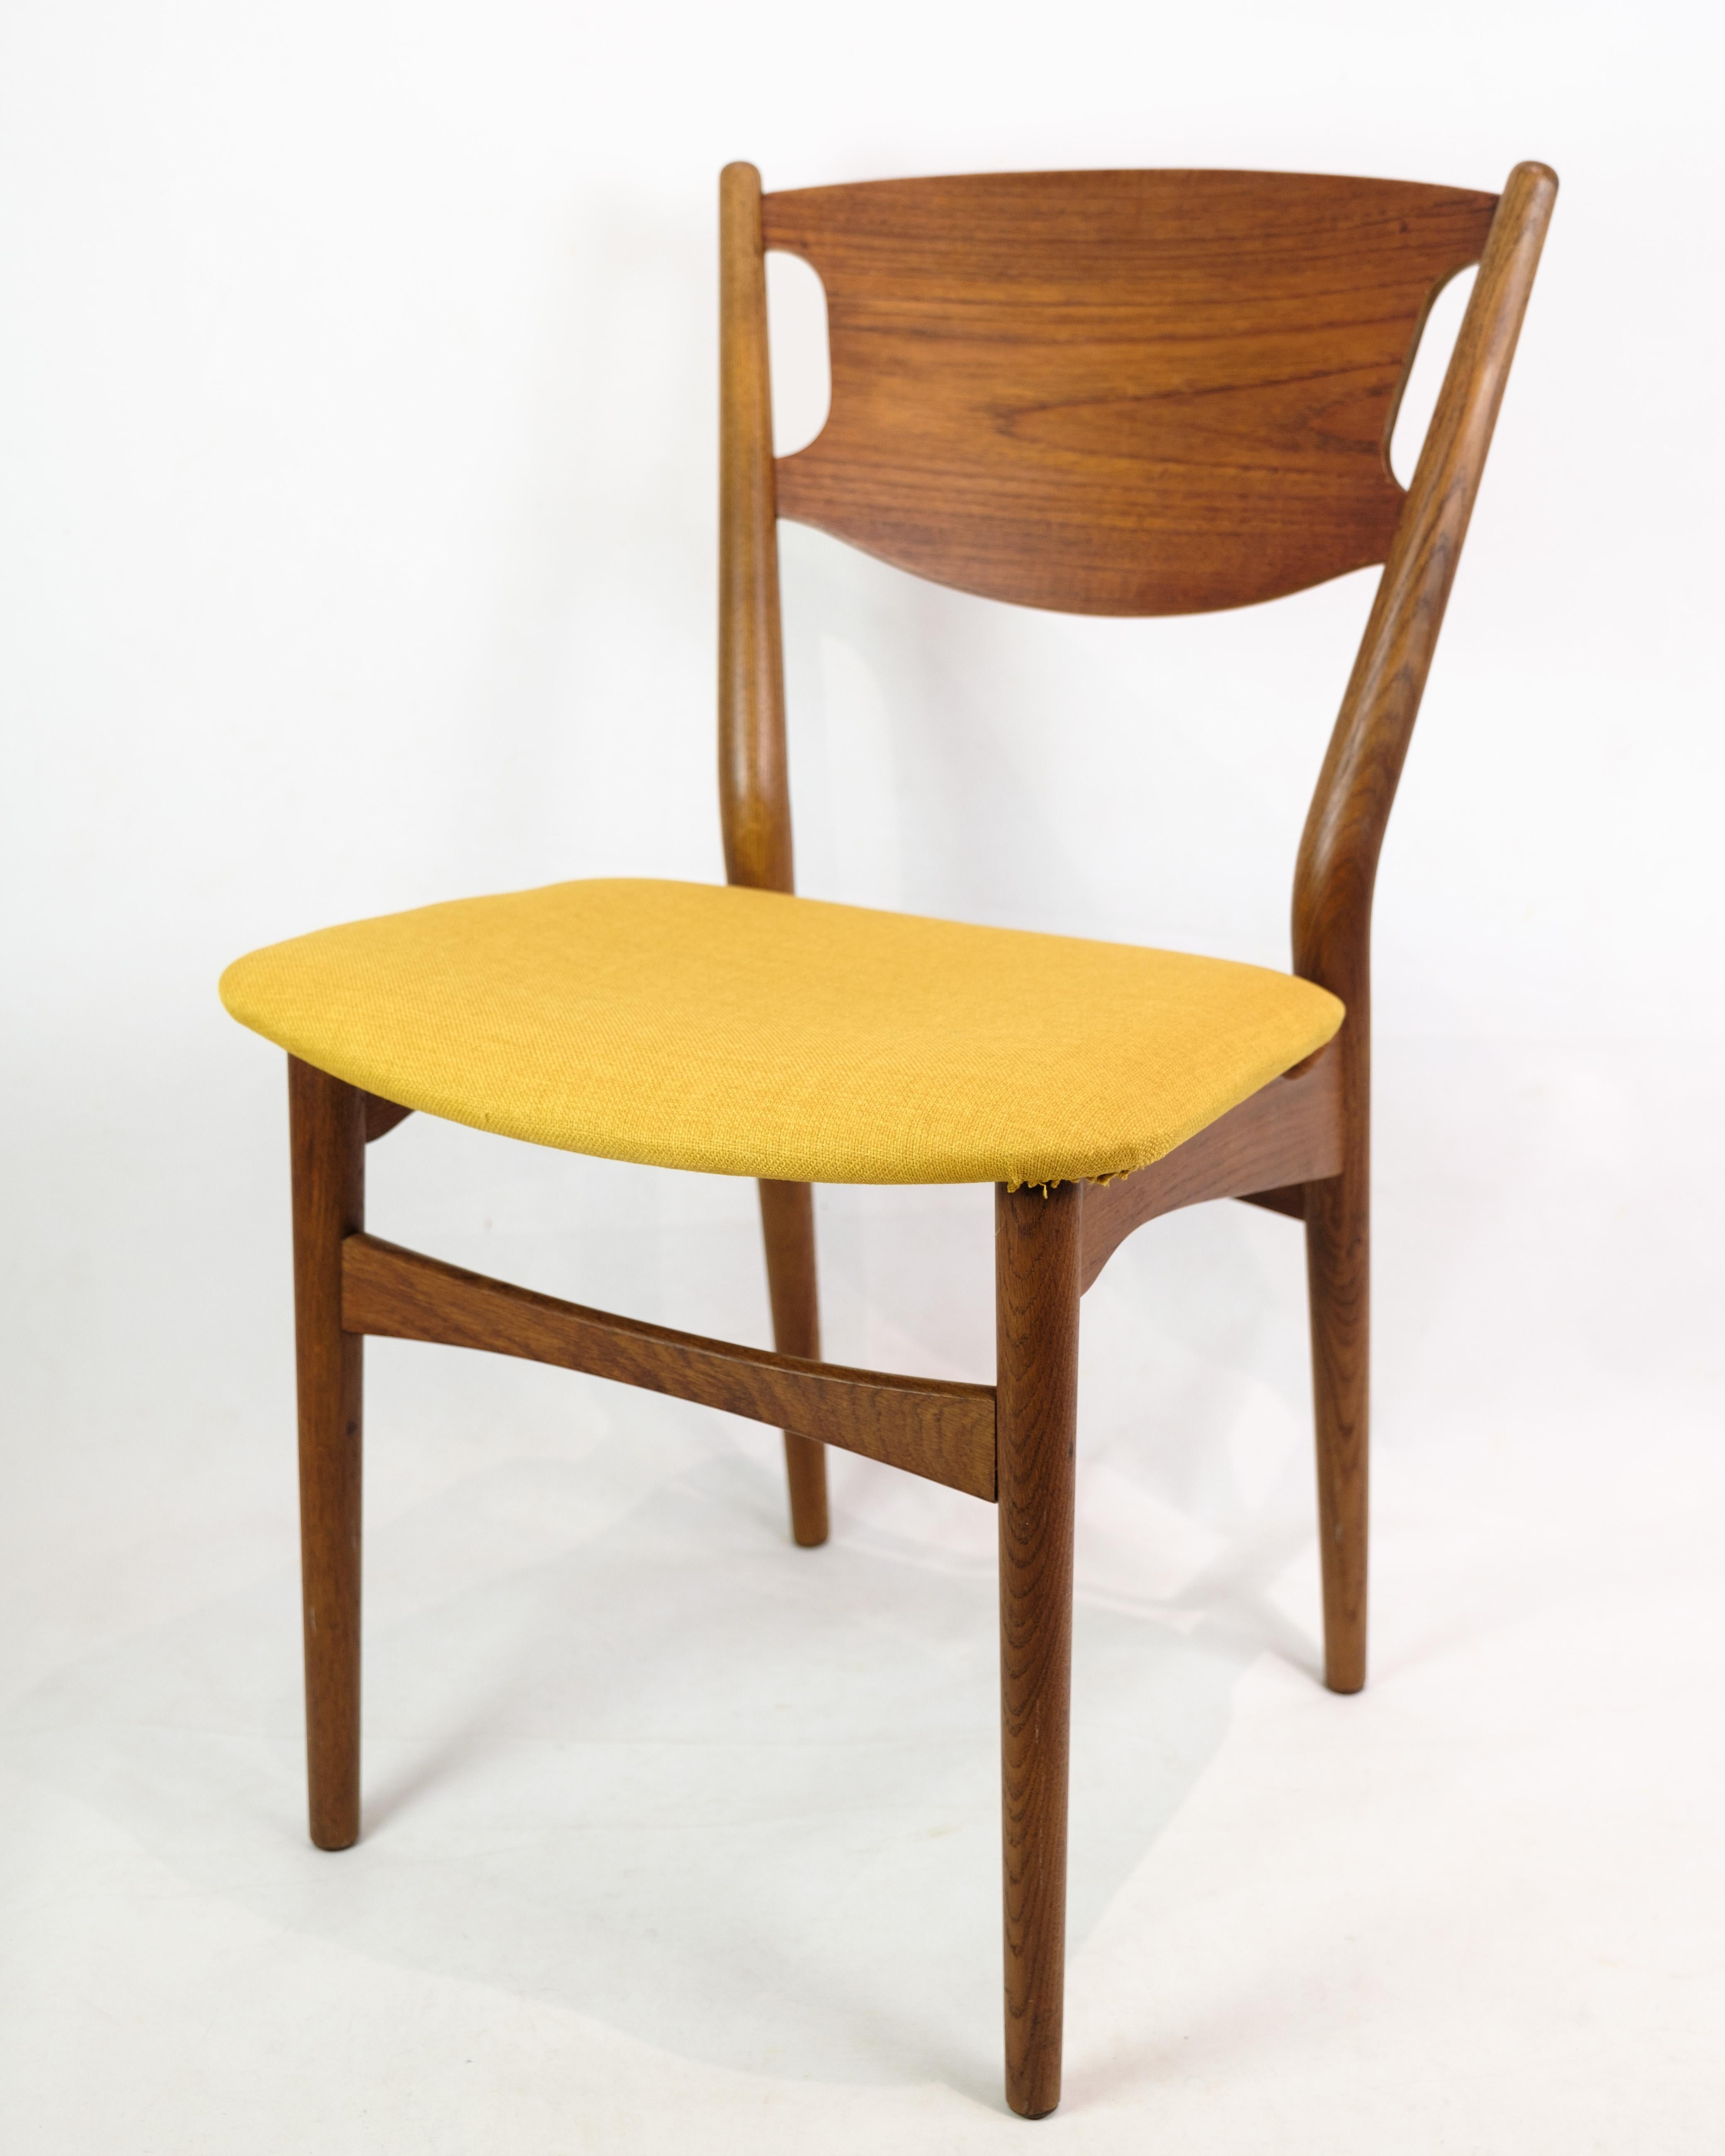 4 Dining Room Chairs, Danish Design, Teak Wood, Fabric Cover, 1960 For Sale 4